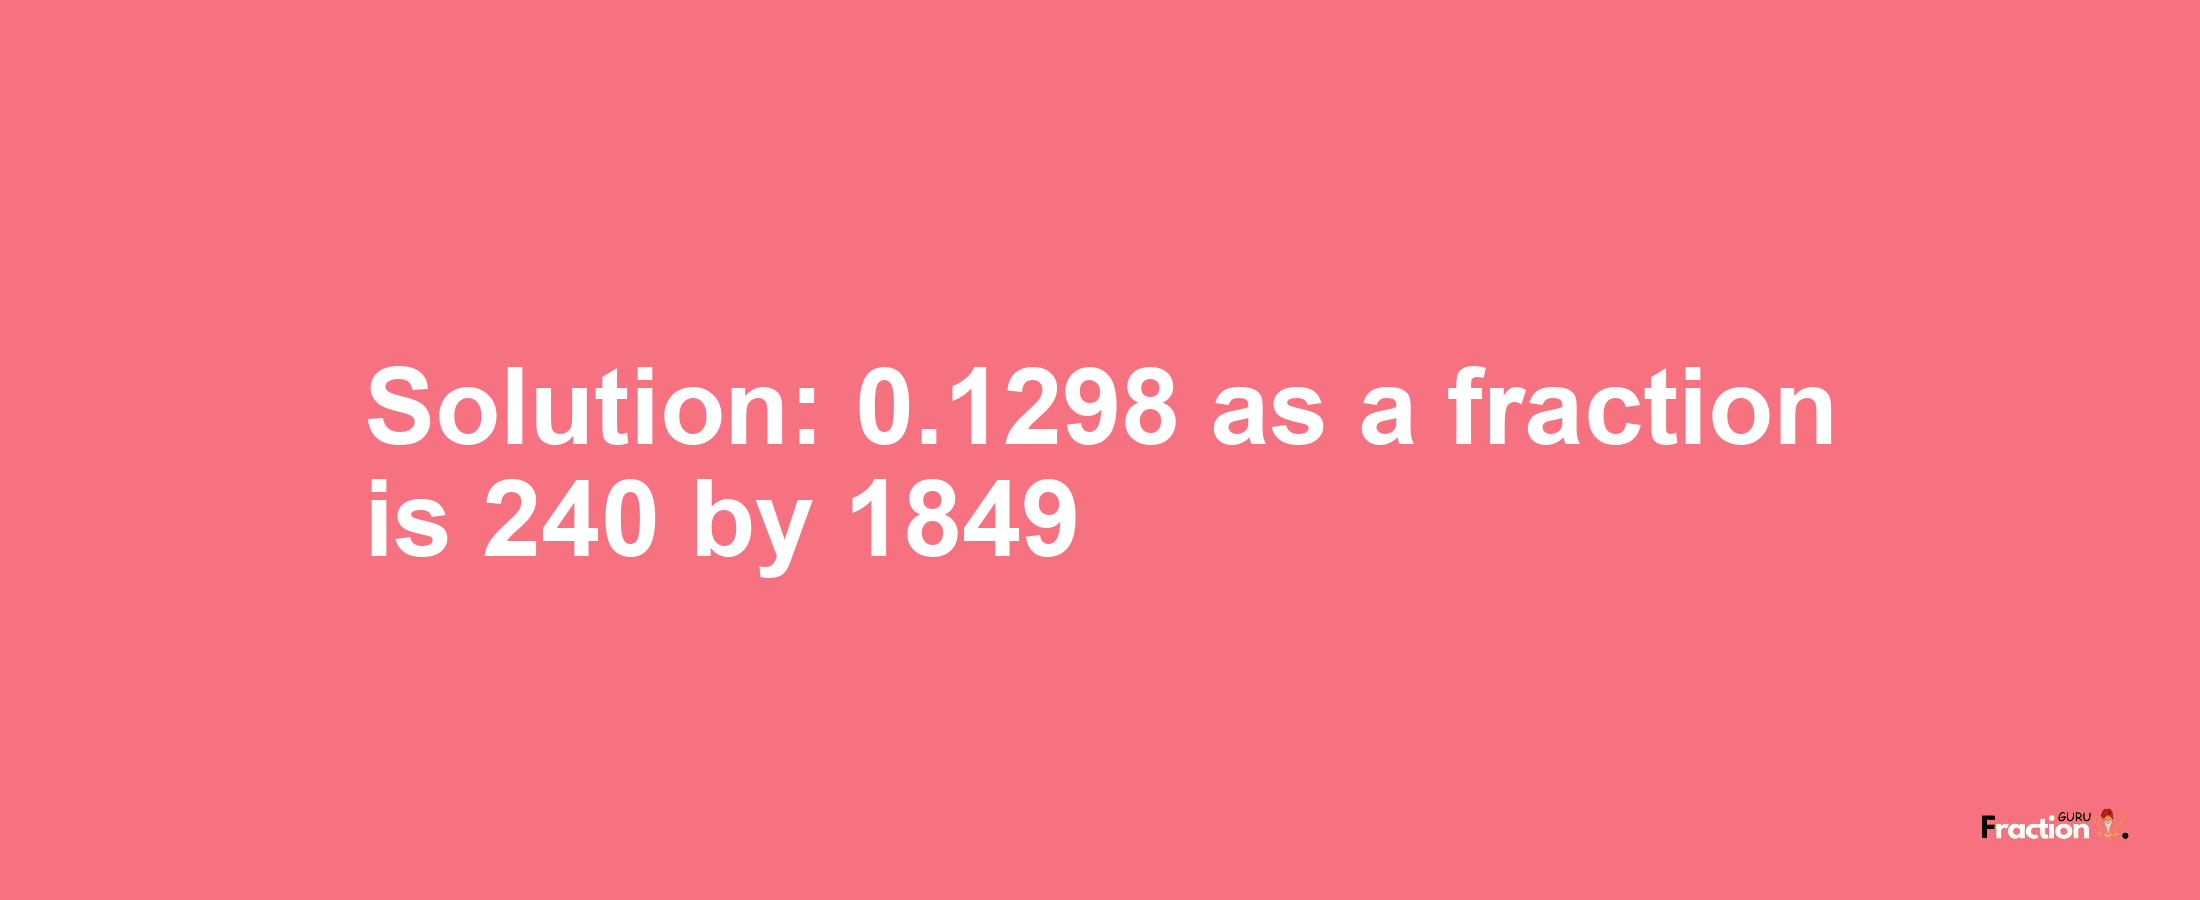 Solution:0.1298 as a fraction is 240/1849